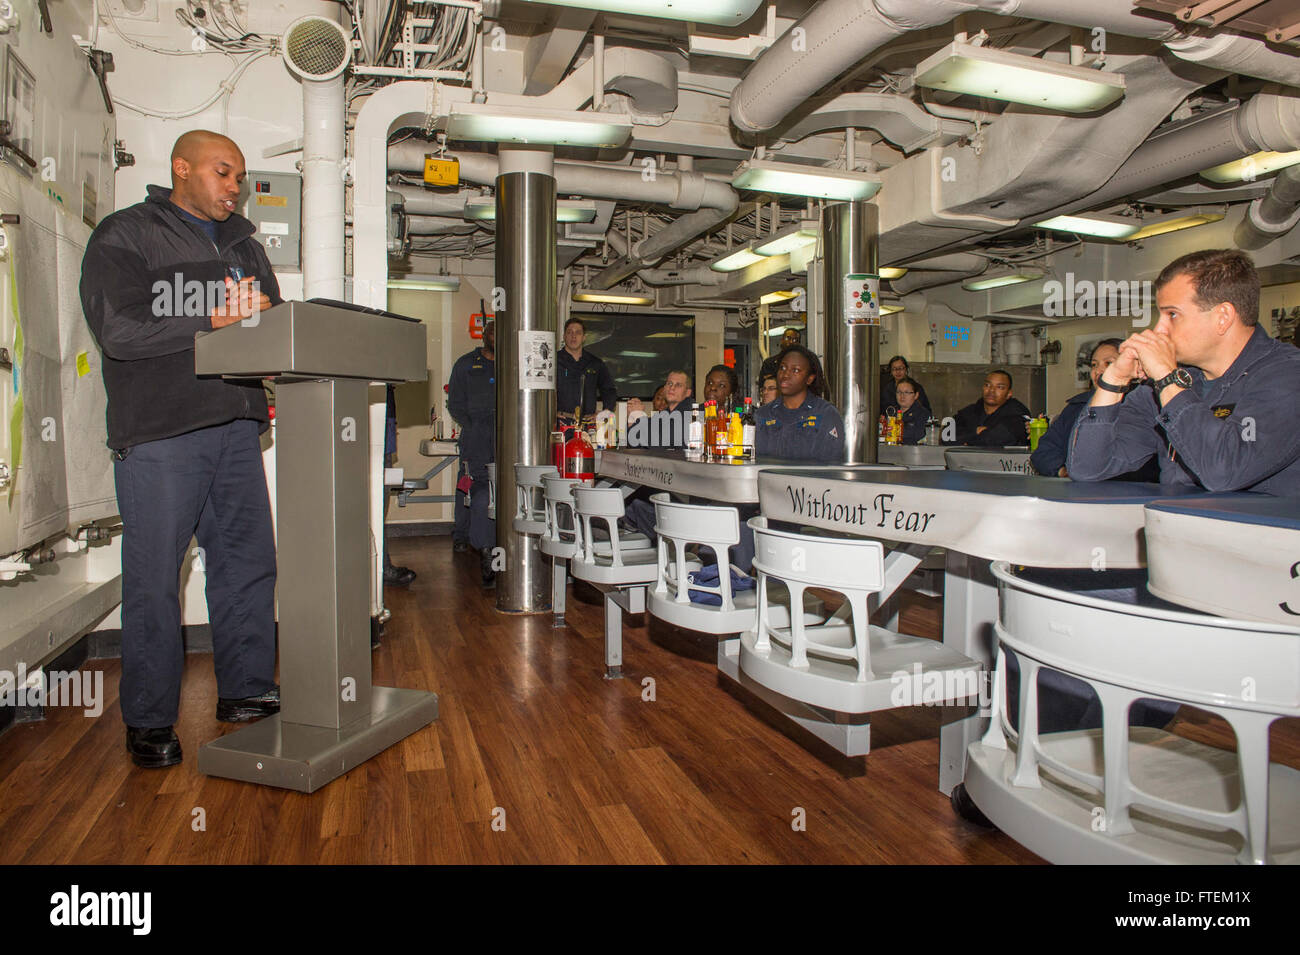 ATLANTIC OCEAN (Feb. 19, 2015) Lt. j. g. Marquis Jones, USS Laboon (DDG 58) command chaplain, speaks about Dr. Martin Luther King, Jr., during a Black History Month Celebration aboard ship, Feb. 19, 2015. Laboon, an Arleigh Burke-class guided-missile destroyer home ported in Norfolk, is underway conducting naval operations in the U.S. 6th Fleet area of operations in support of U.S. national security interests in Europe. Stock Photo